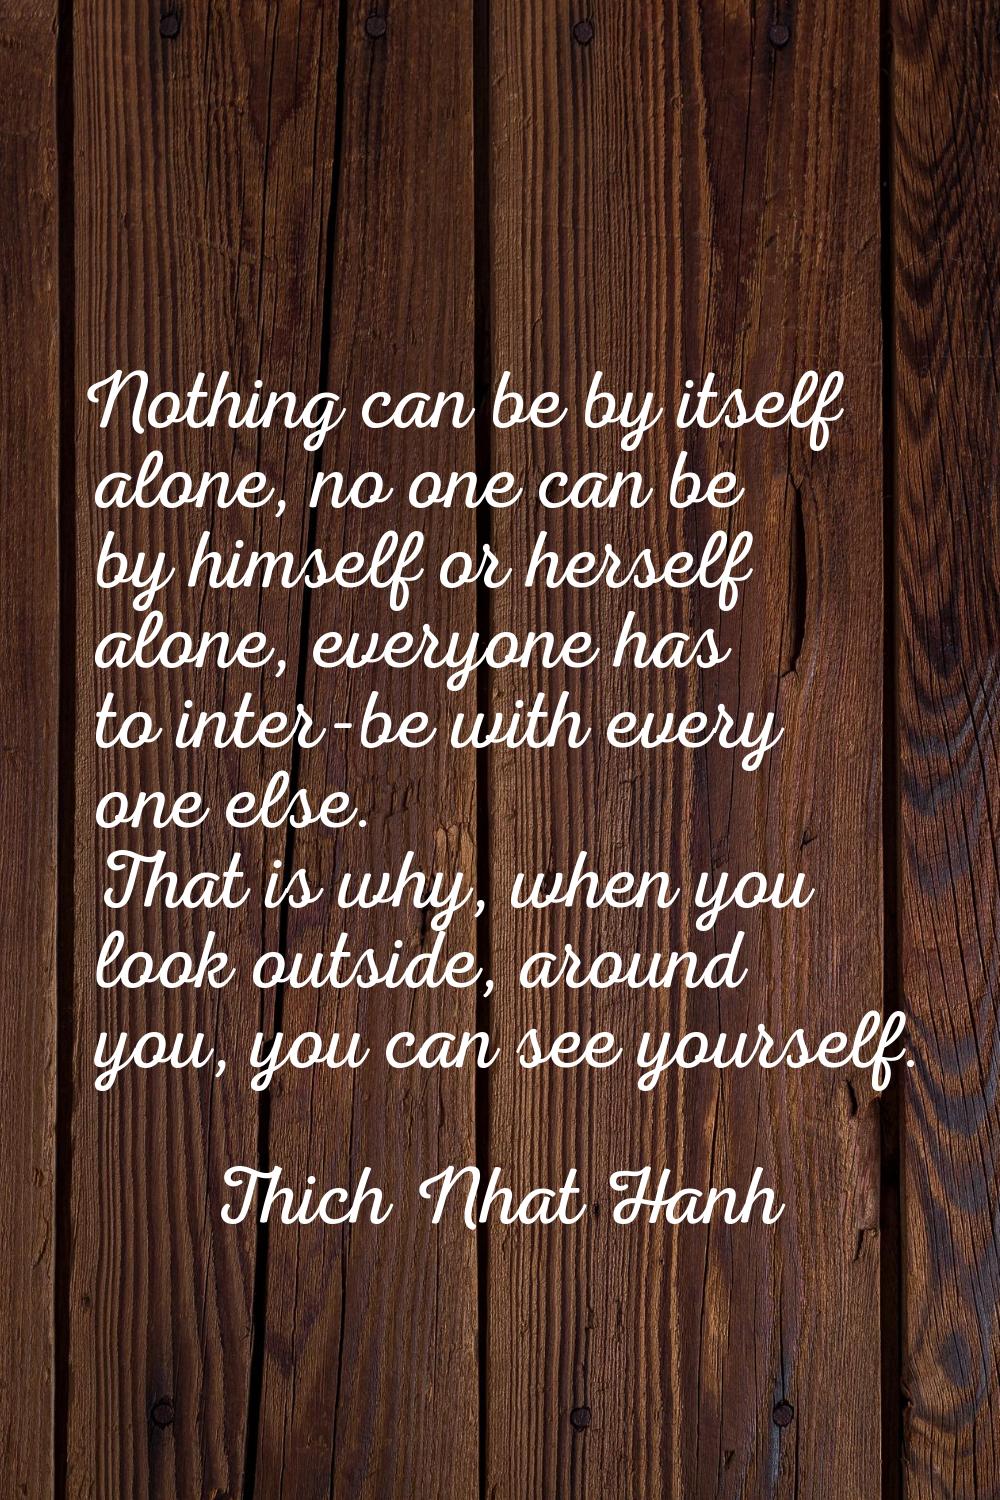 Nothing can be by itself alone, no one can be by himself or herself alone, everyone has to inter-be